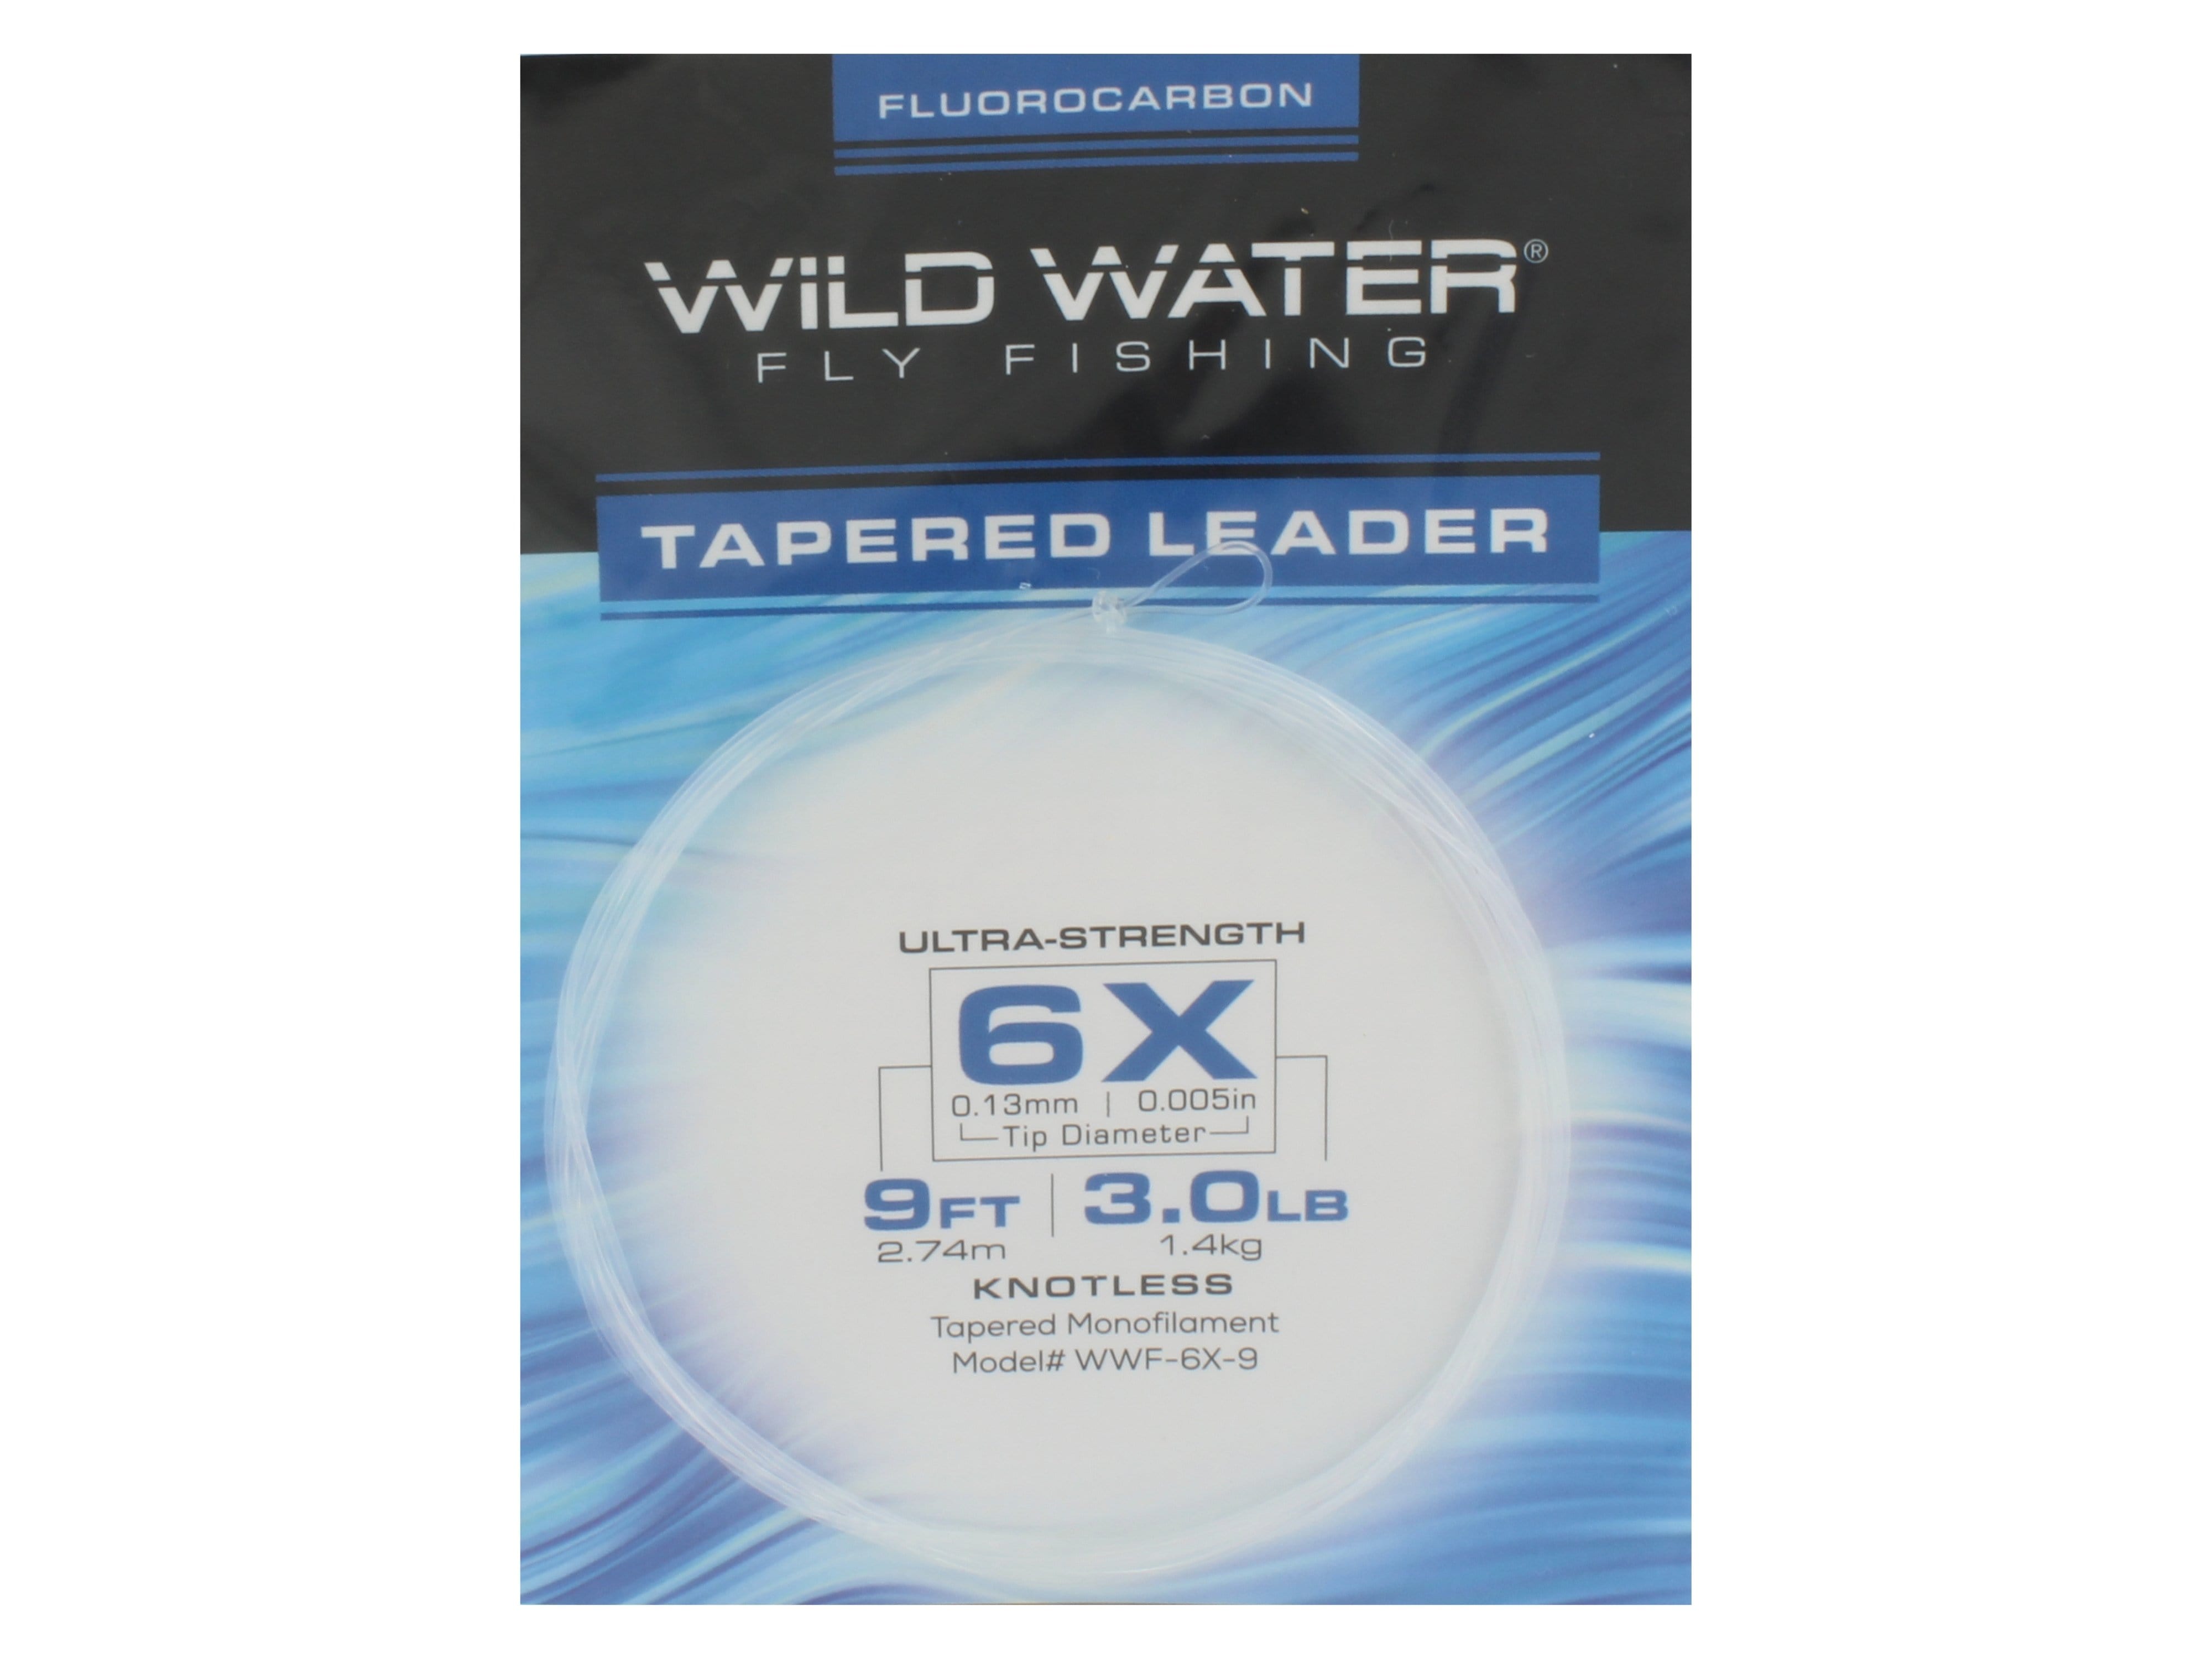 Wild Water Fly Fishing Fluorocarbon Leader 6X, 9', 3 Pack – Gotta